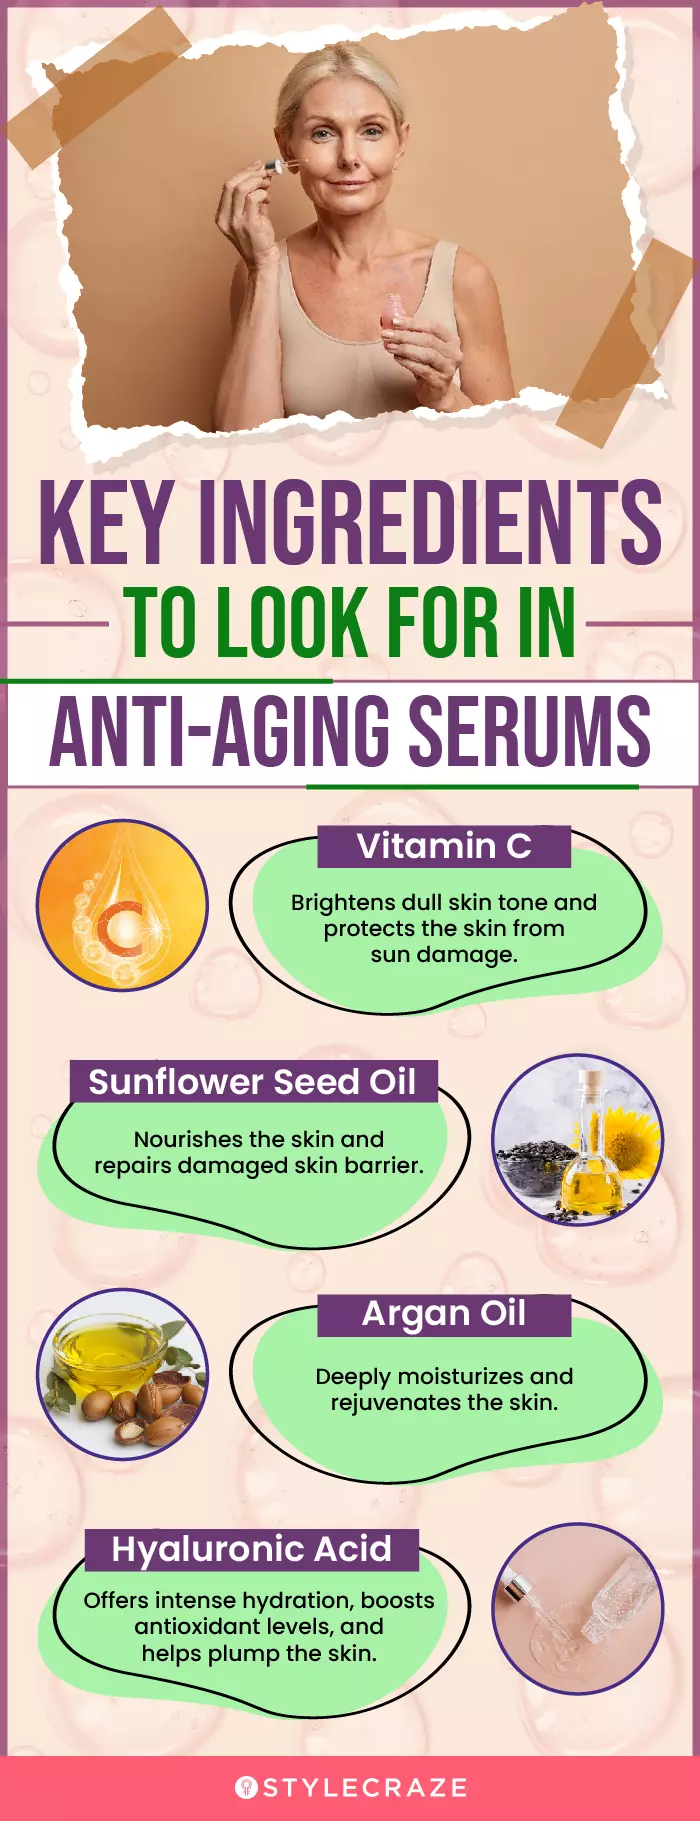 Key Ingredients To Look For In Anti-Aging Serums (infographic)